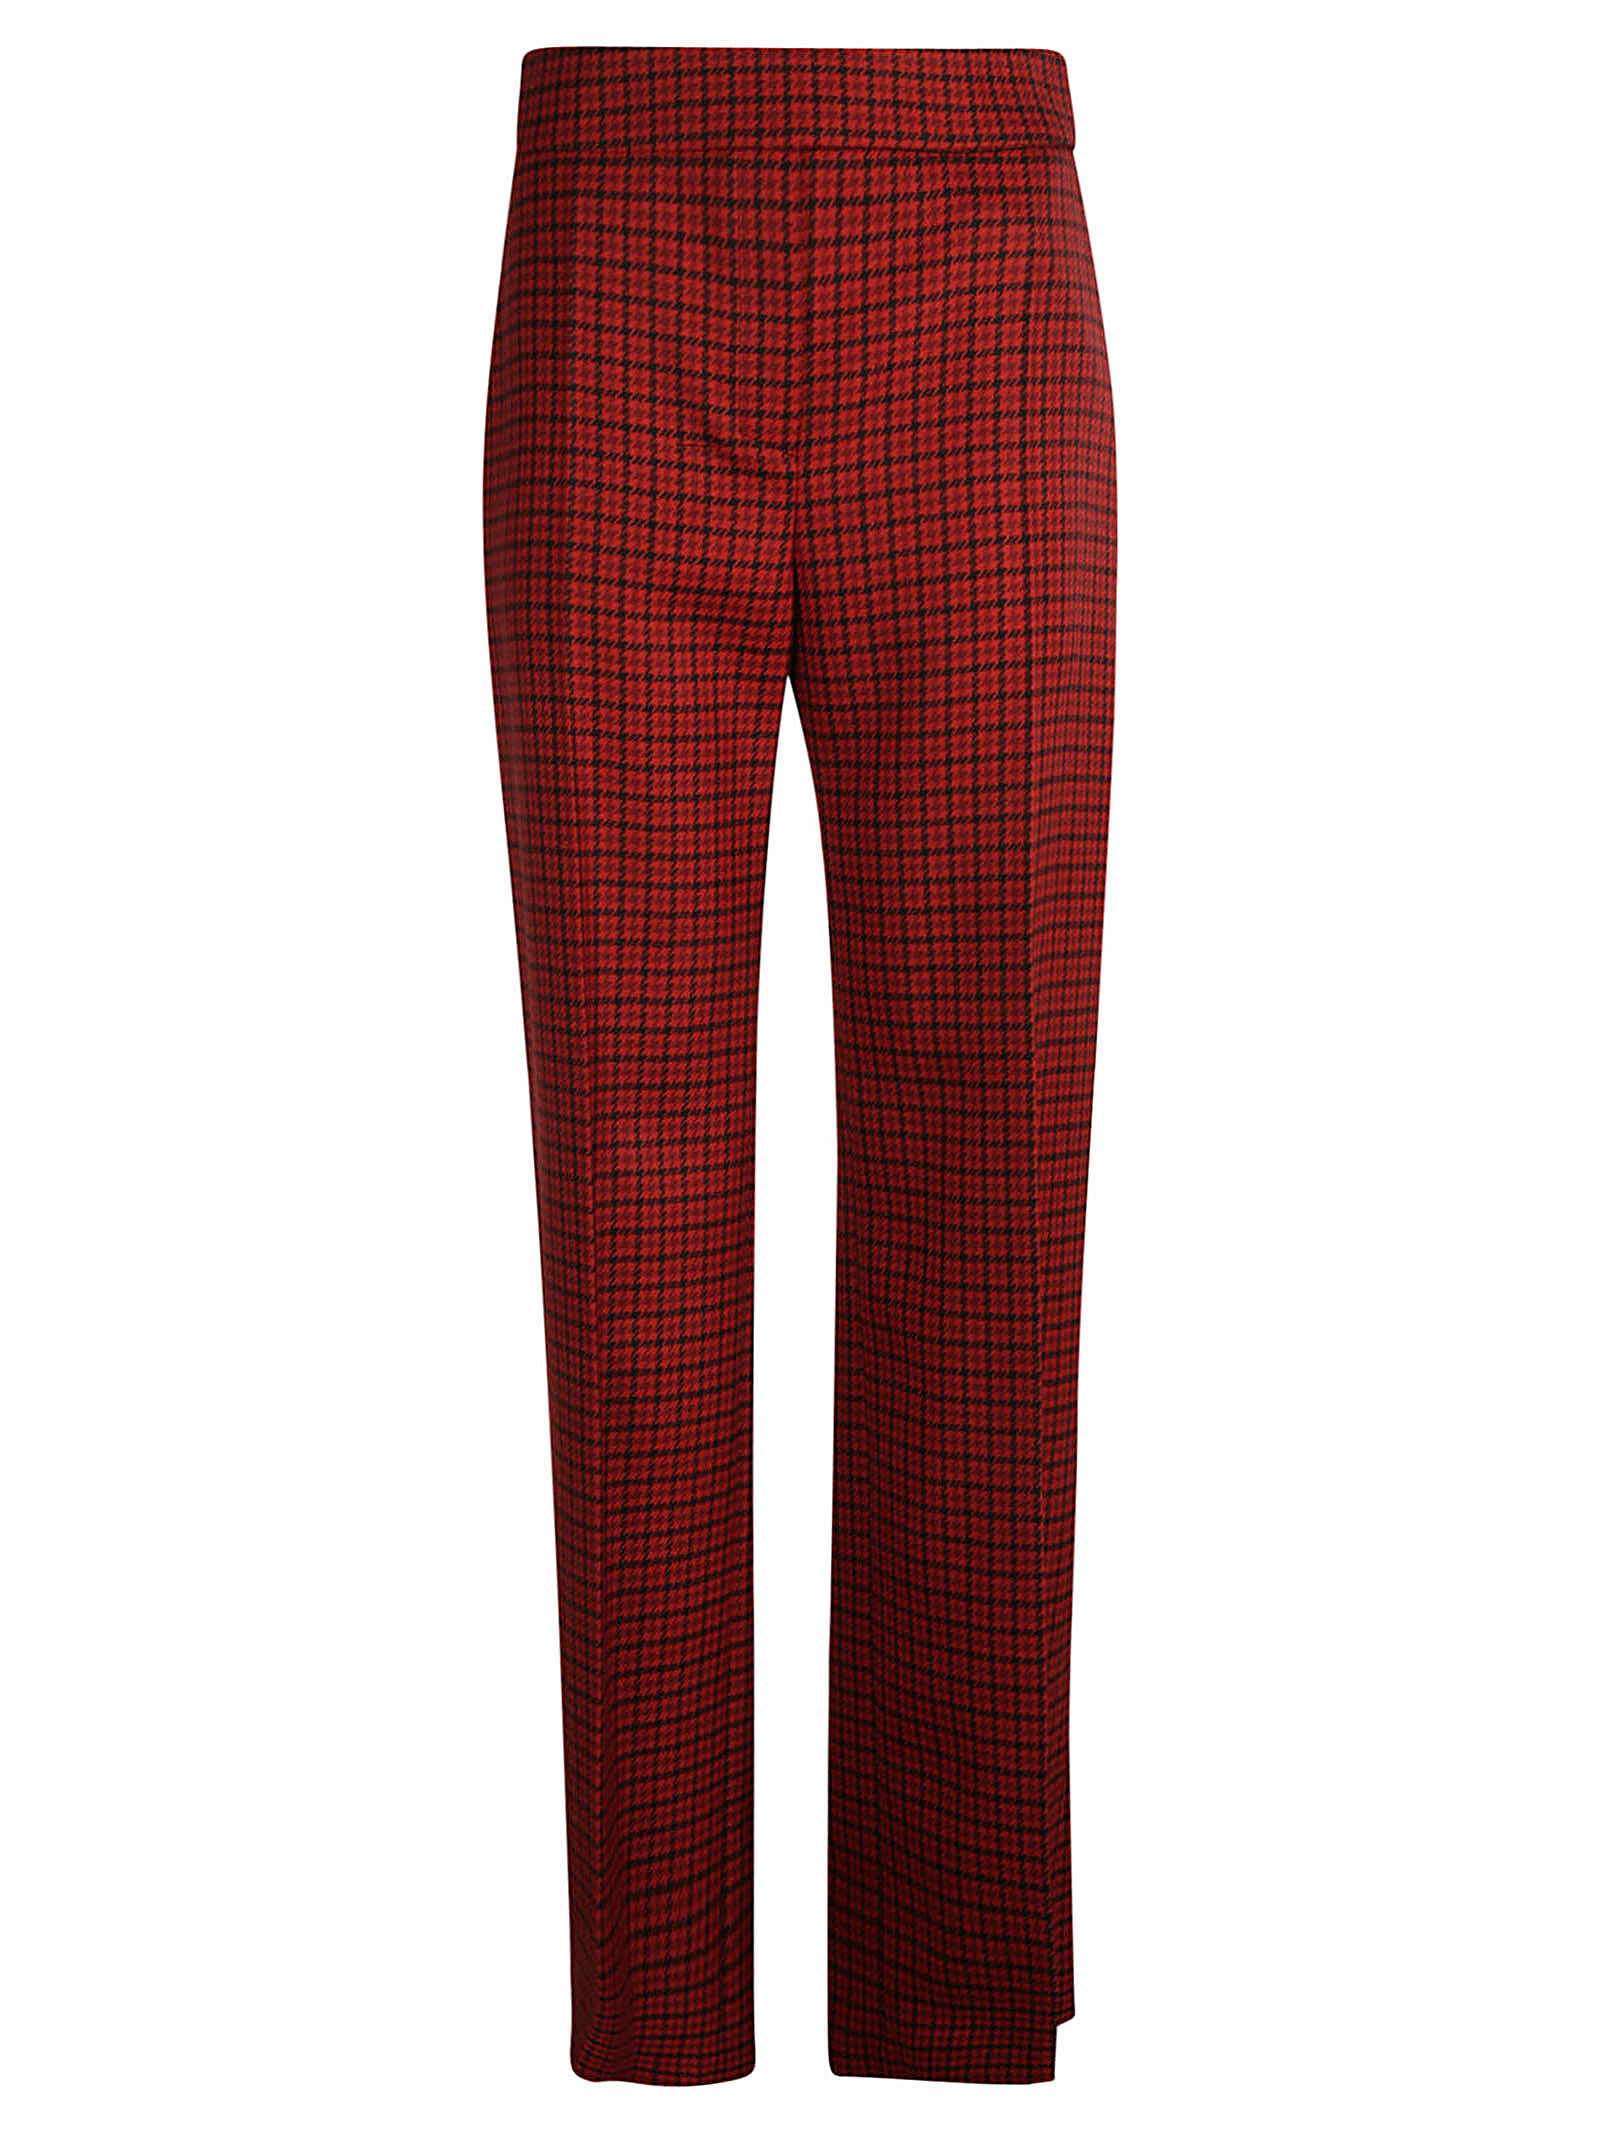 Alexandre Vauthier Check Houndstooth Trousers